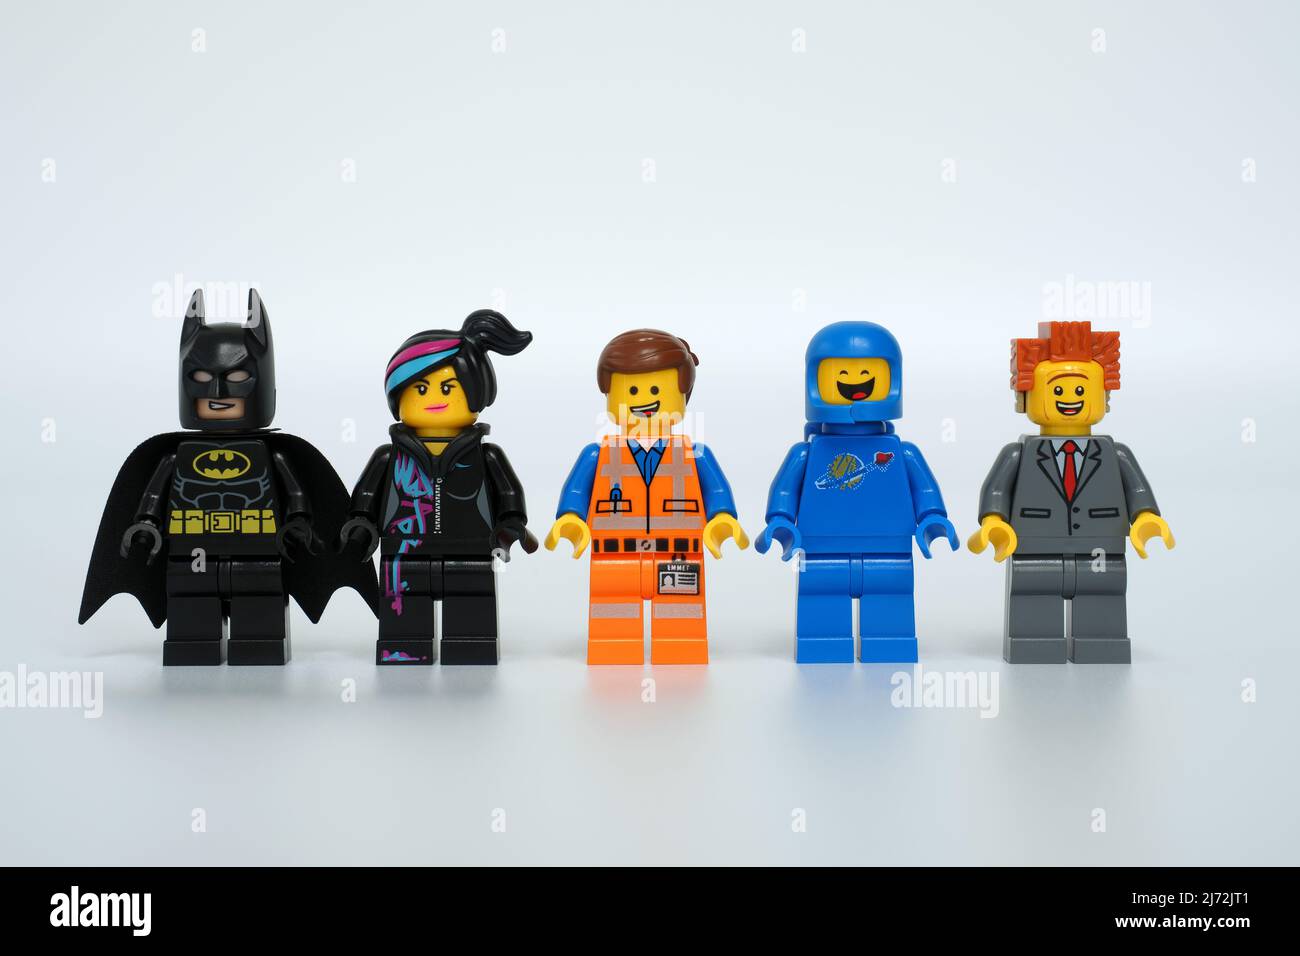 44MP HRS. Lego mini figures from The Lego Movie. The main characters of  Batman, Wyldstyle, Emmet Brickowski, Benny, & Lord Business Stock Photo -  Alamy